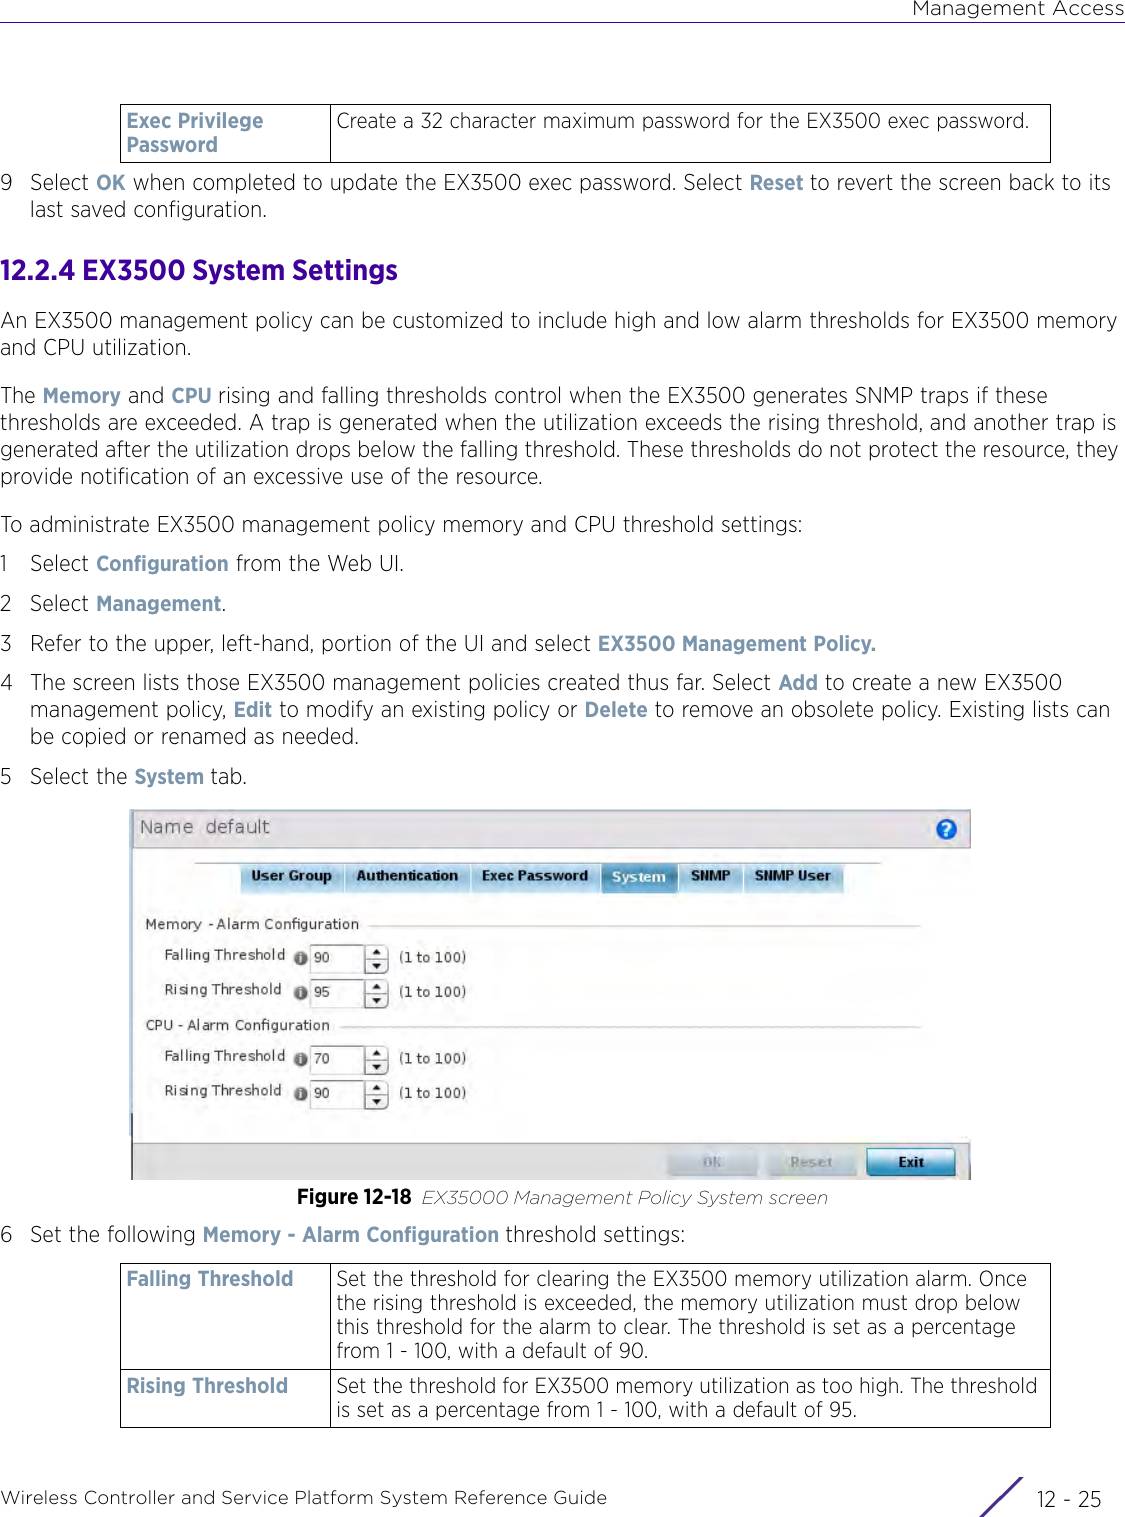 Management AccessWireless Controller and Service Platform System Reference Guide 12 - 259Select OK when completed to update the EX3500 exec password. Select Reset to revert the screen back to its last saved configuration.12.2.4 EX3500 System SettingsAn EX3500 management policy can be customized to include high and low alarm thresholds for EX3500 memory and CPU utilization. The Memory and CPU rising and falling thresholds control when the EX3500 generates SNMP traps if these thresholds are exceeded. A trap is generated when the utilization exceeds the rising threshold, and another trap is generated after the utilization drops below the falling threshold. These thresholds do not protect the resource, they provide notification of an excessive use of the resource.To administrate EX3500 management policy memory and CPU threshold settings:1Select Configuration from the Web UI.2Select Management.3 Refer to the upper, left-hand, portion of the UI and select EX3500 Management Policy.4 The screen lists those EX3500 management policies created thus far. Select Add to create a new EX3500 management policy, Edit to modify an existing policy or Delete to remove an obsolete policy. Existing lists can be copied or renamed as needed.5 Select the System tab.Figure 12-18 EX35000 Management Policy System screen6 Set the following Memory - Alarm Configuration threshold settings:Exec Privilege PasswordCreate a 32 character maximum password for the EX3500 exec password.Falling Threshold Set the threshold for clearing the EX3500 memory utilization alarm. Once the rising threshold is exceeded, the memory utilization must drop below this threshold for the alarm to clear. The threshold is set as a percentage from 1 - 100, with a default of 90.Rising Threshold Set the threshold for EX3500 memory utilization as too high. The threshold is set as a percentage from 1 - 100, with a default of 95.